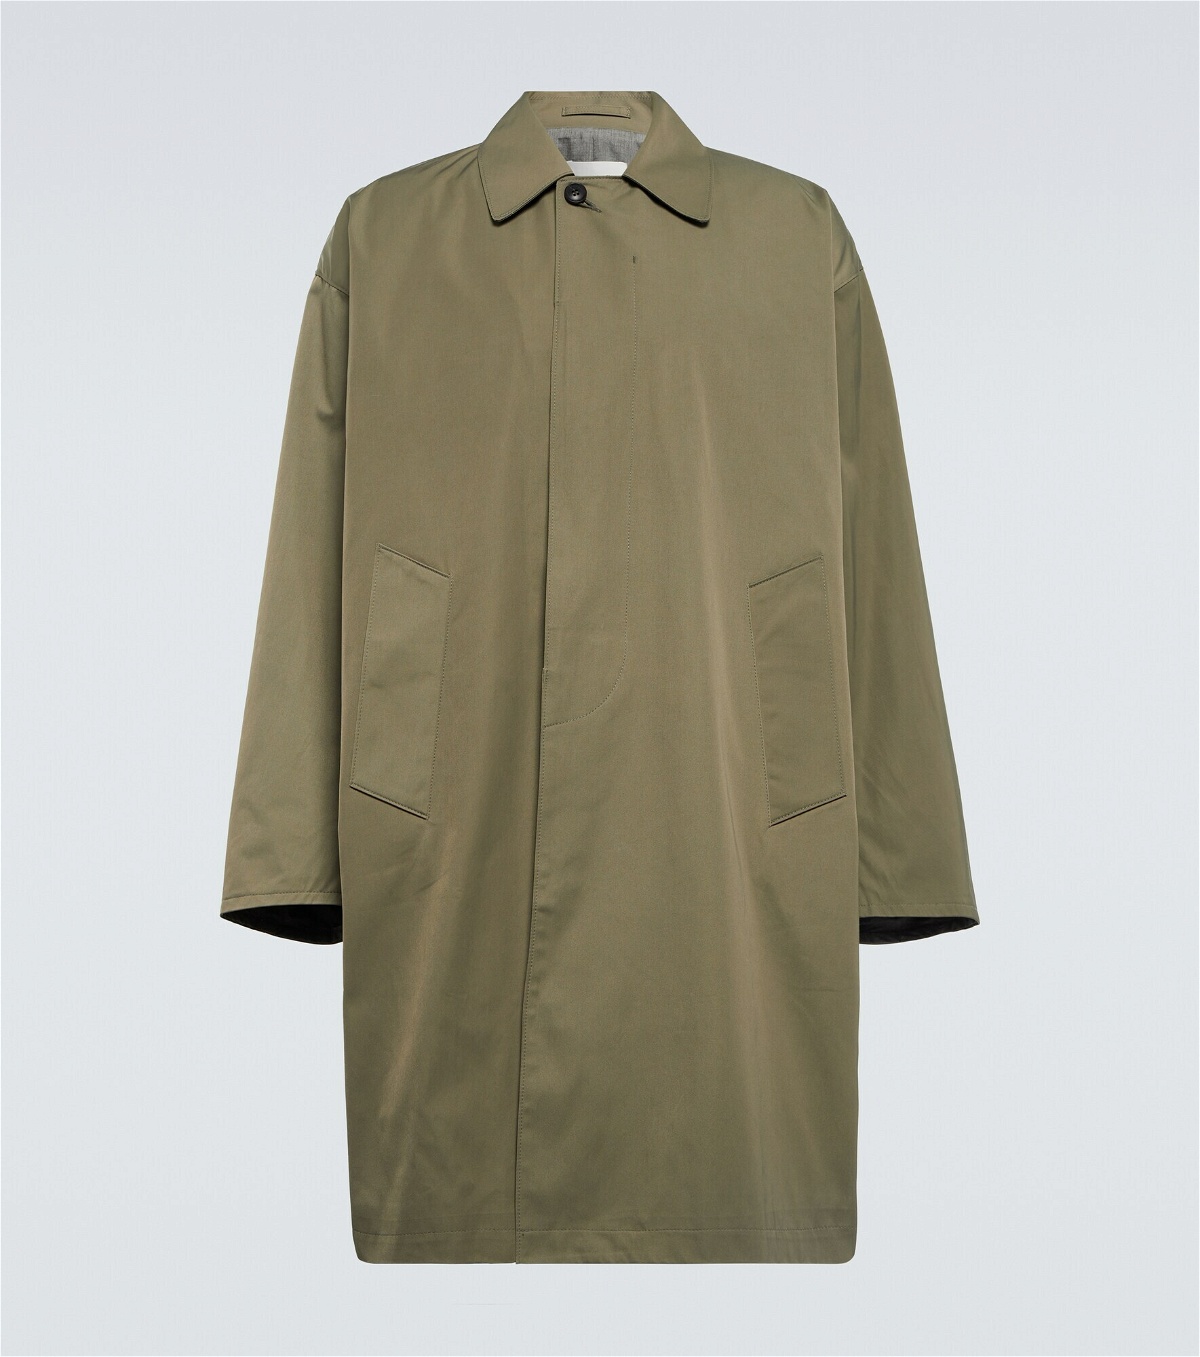 The Frankie Shop - Peter trench coat The Frankie Shop